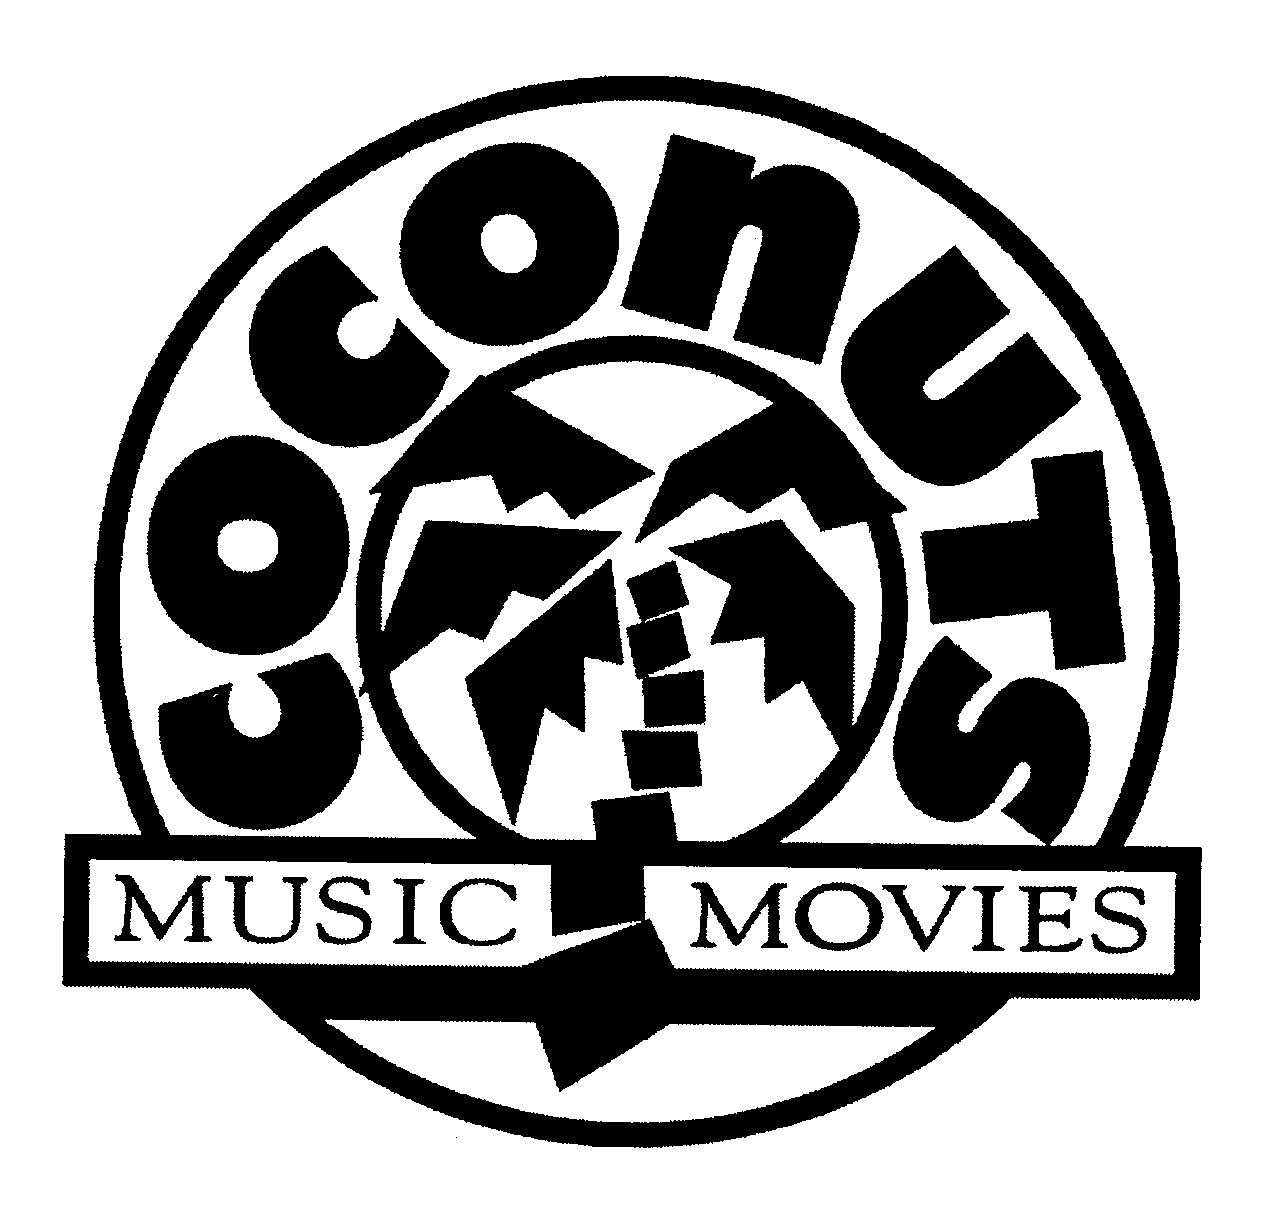  COCONUTS MUSIC MOVIES